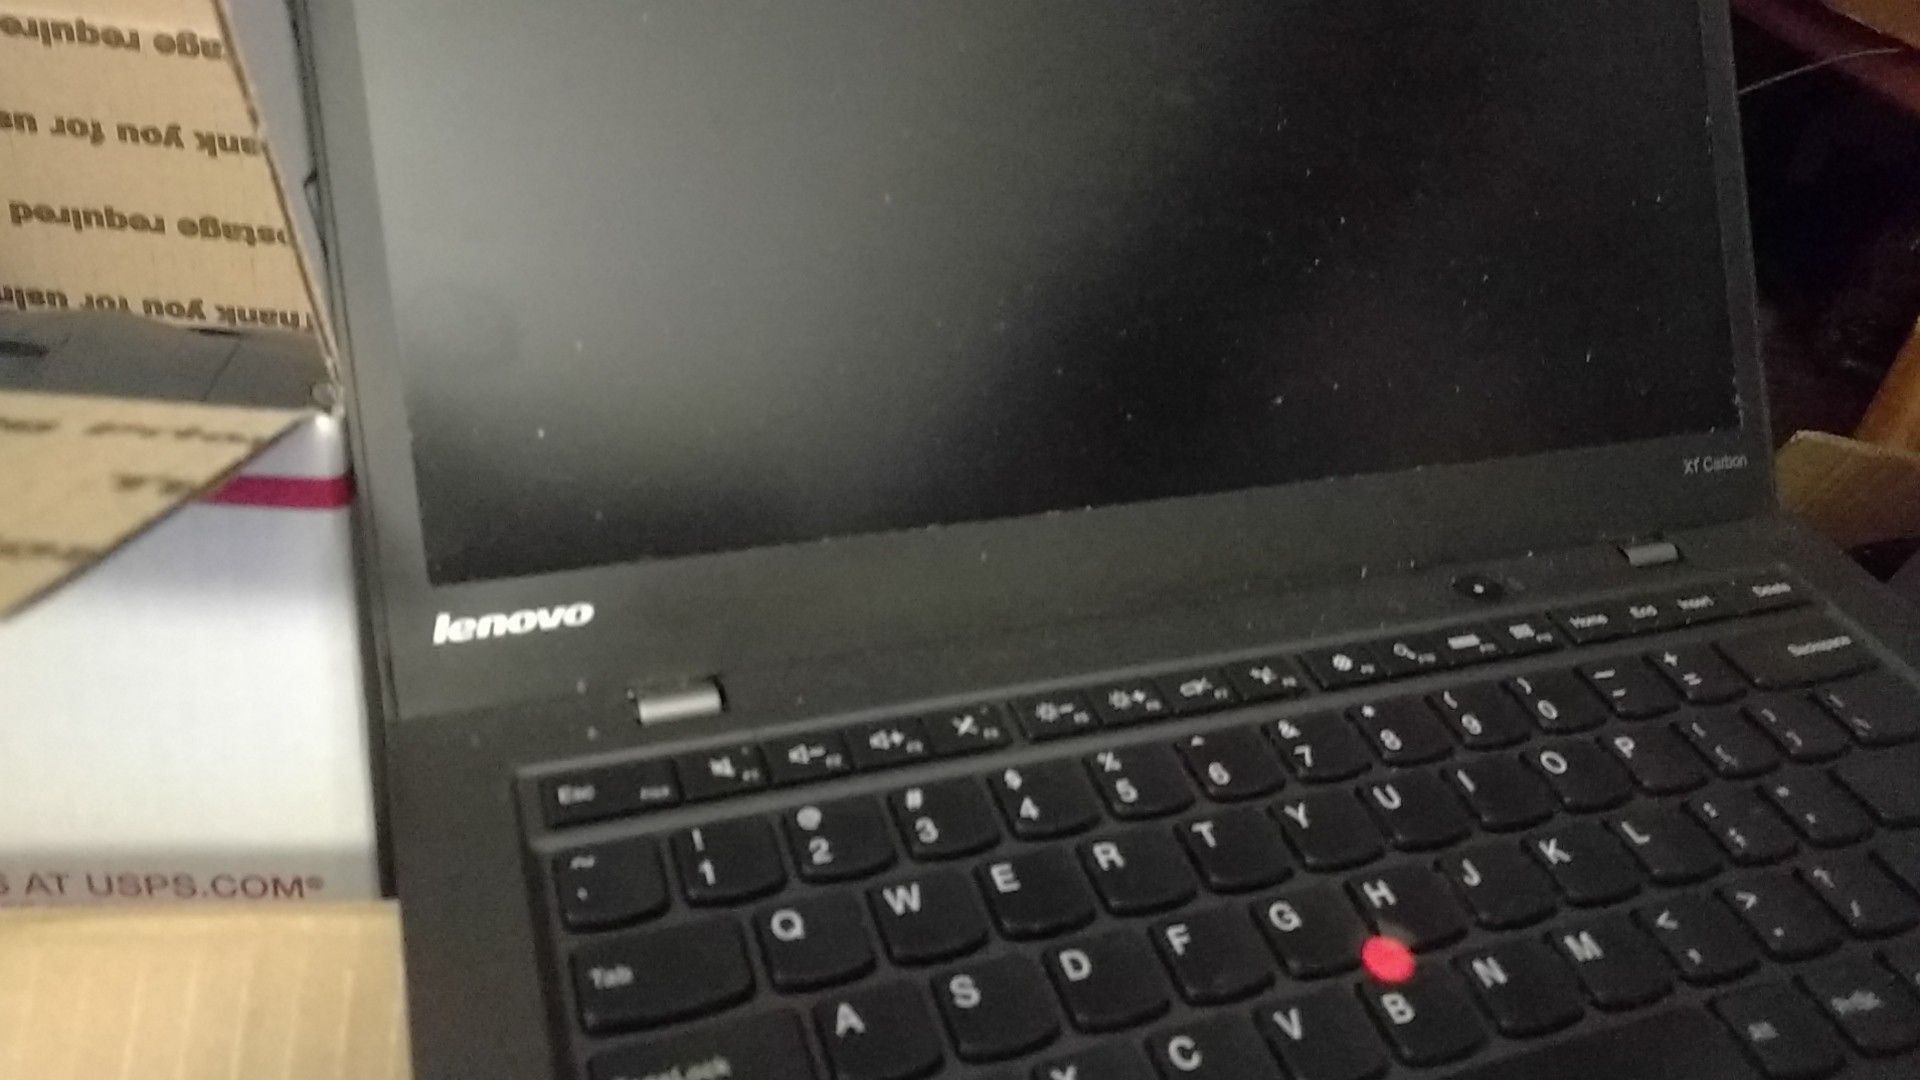 Lenovo x1 Carbon ultra slim and lightweight 3rd generation i7 5600i new win 10 Pro, 8 GB ram, office 2013,good battery, AC adapter o @ 275.00